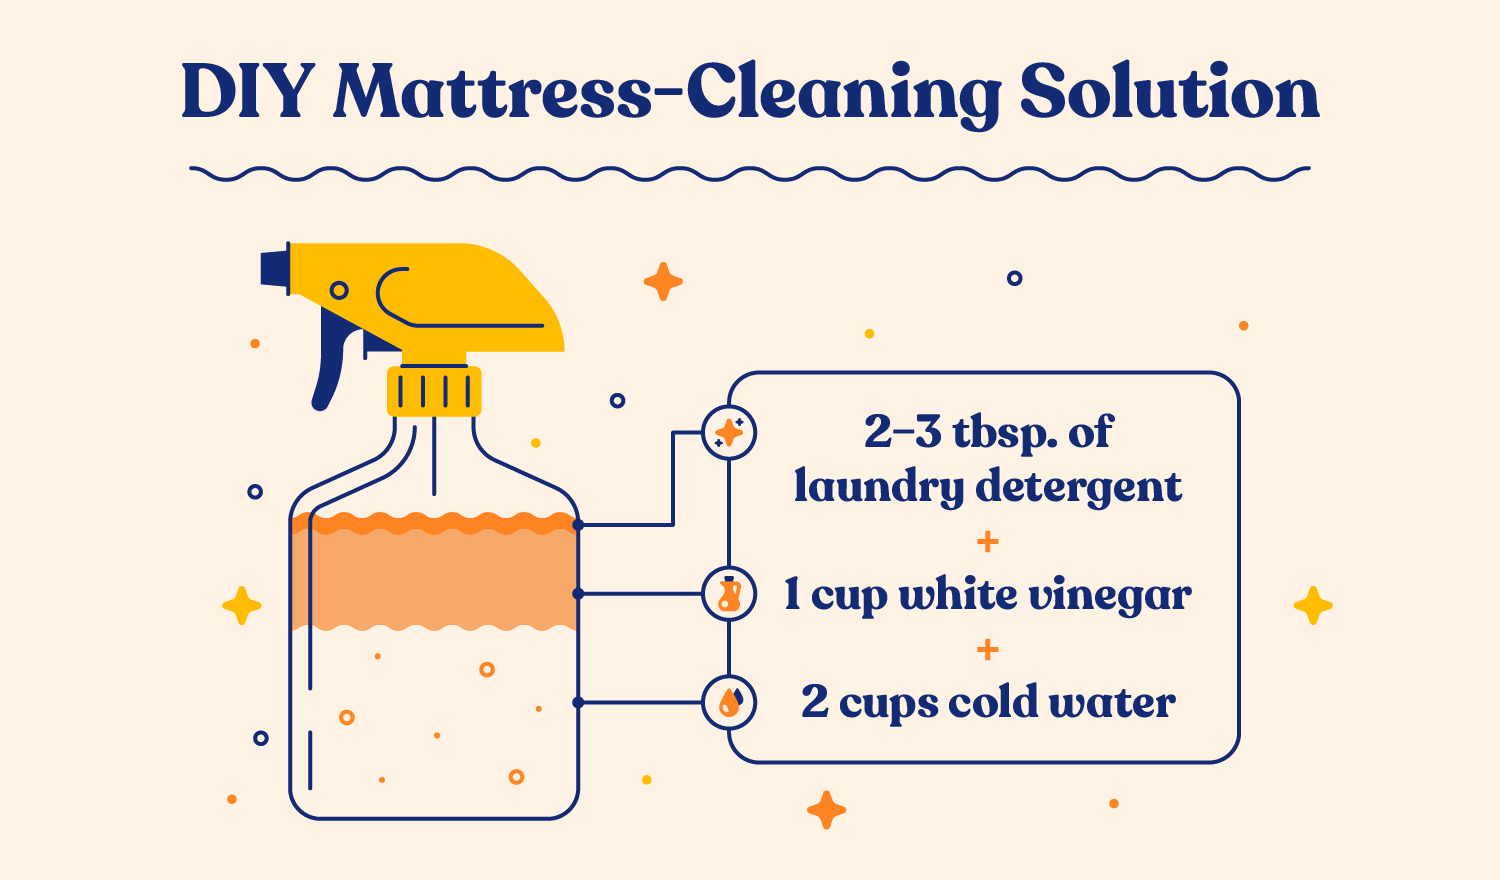 Steps To Clean An Air Mattress With Pee On It